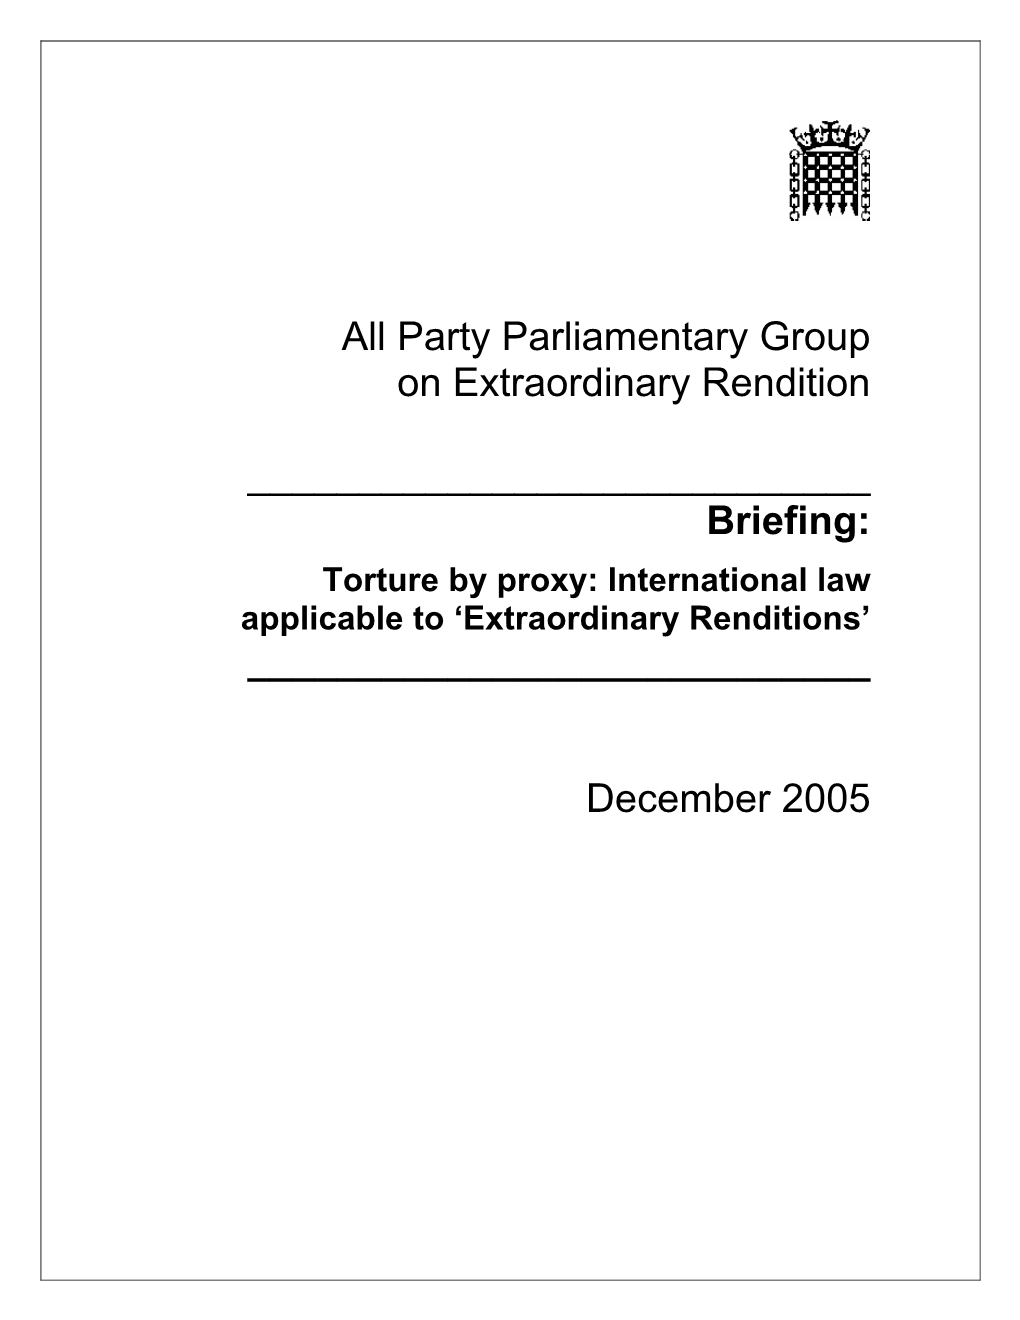 All Party Parliamentary Group on Extraordinary Rendition